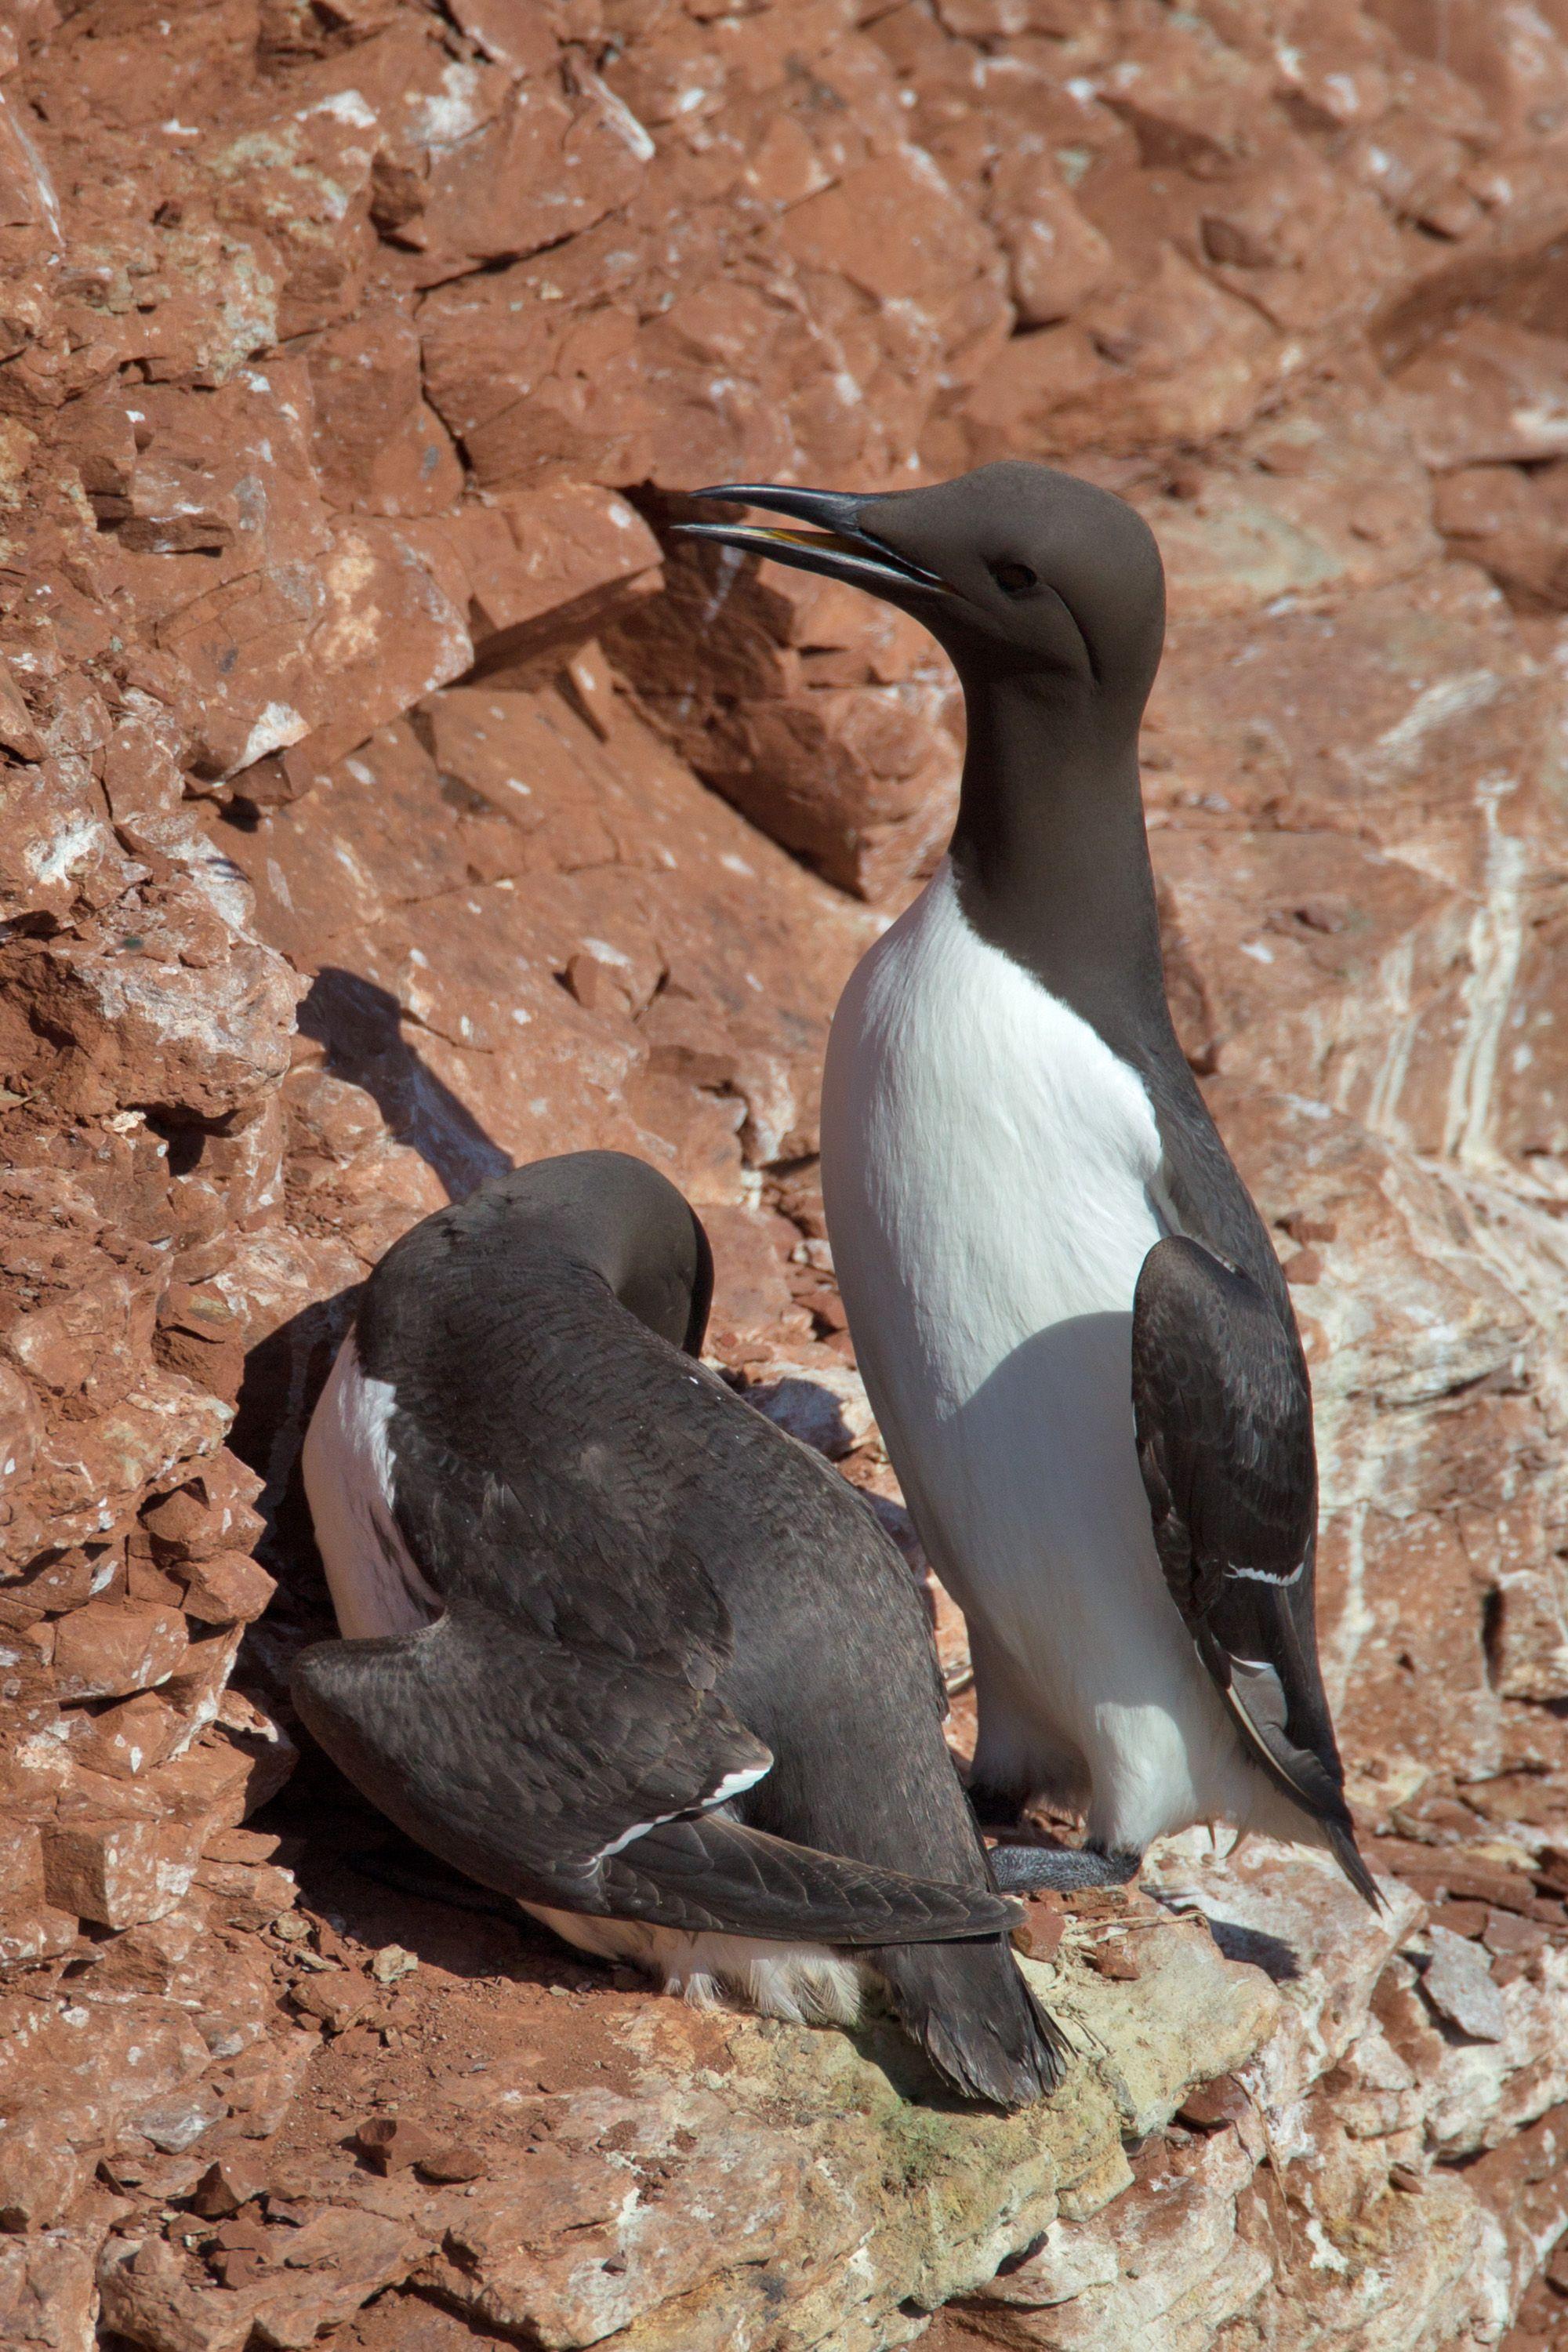 Diving Bird in Circle Logo - Common murre